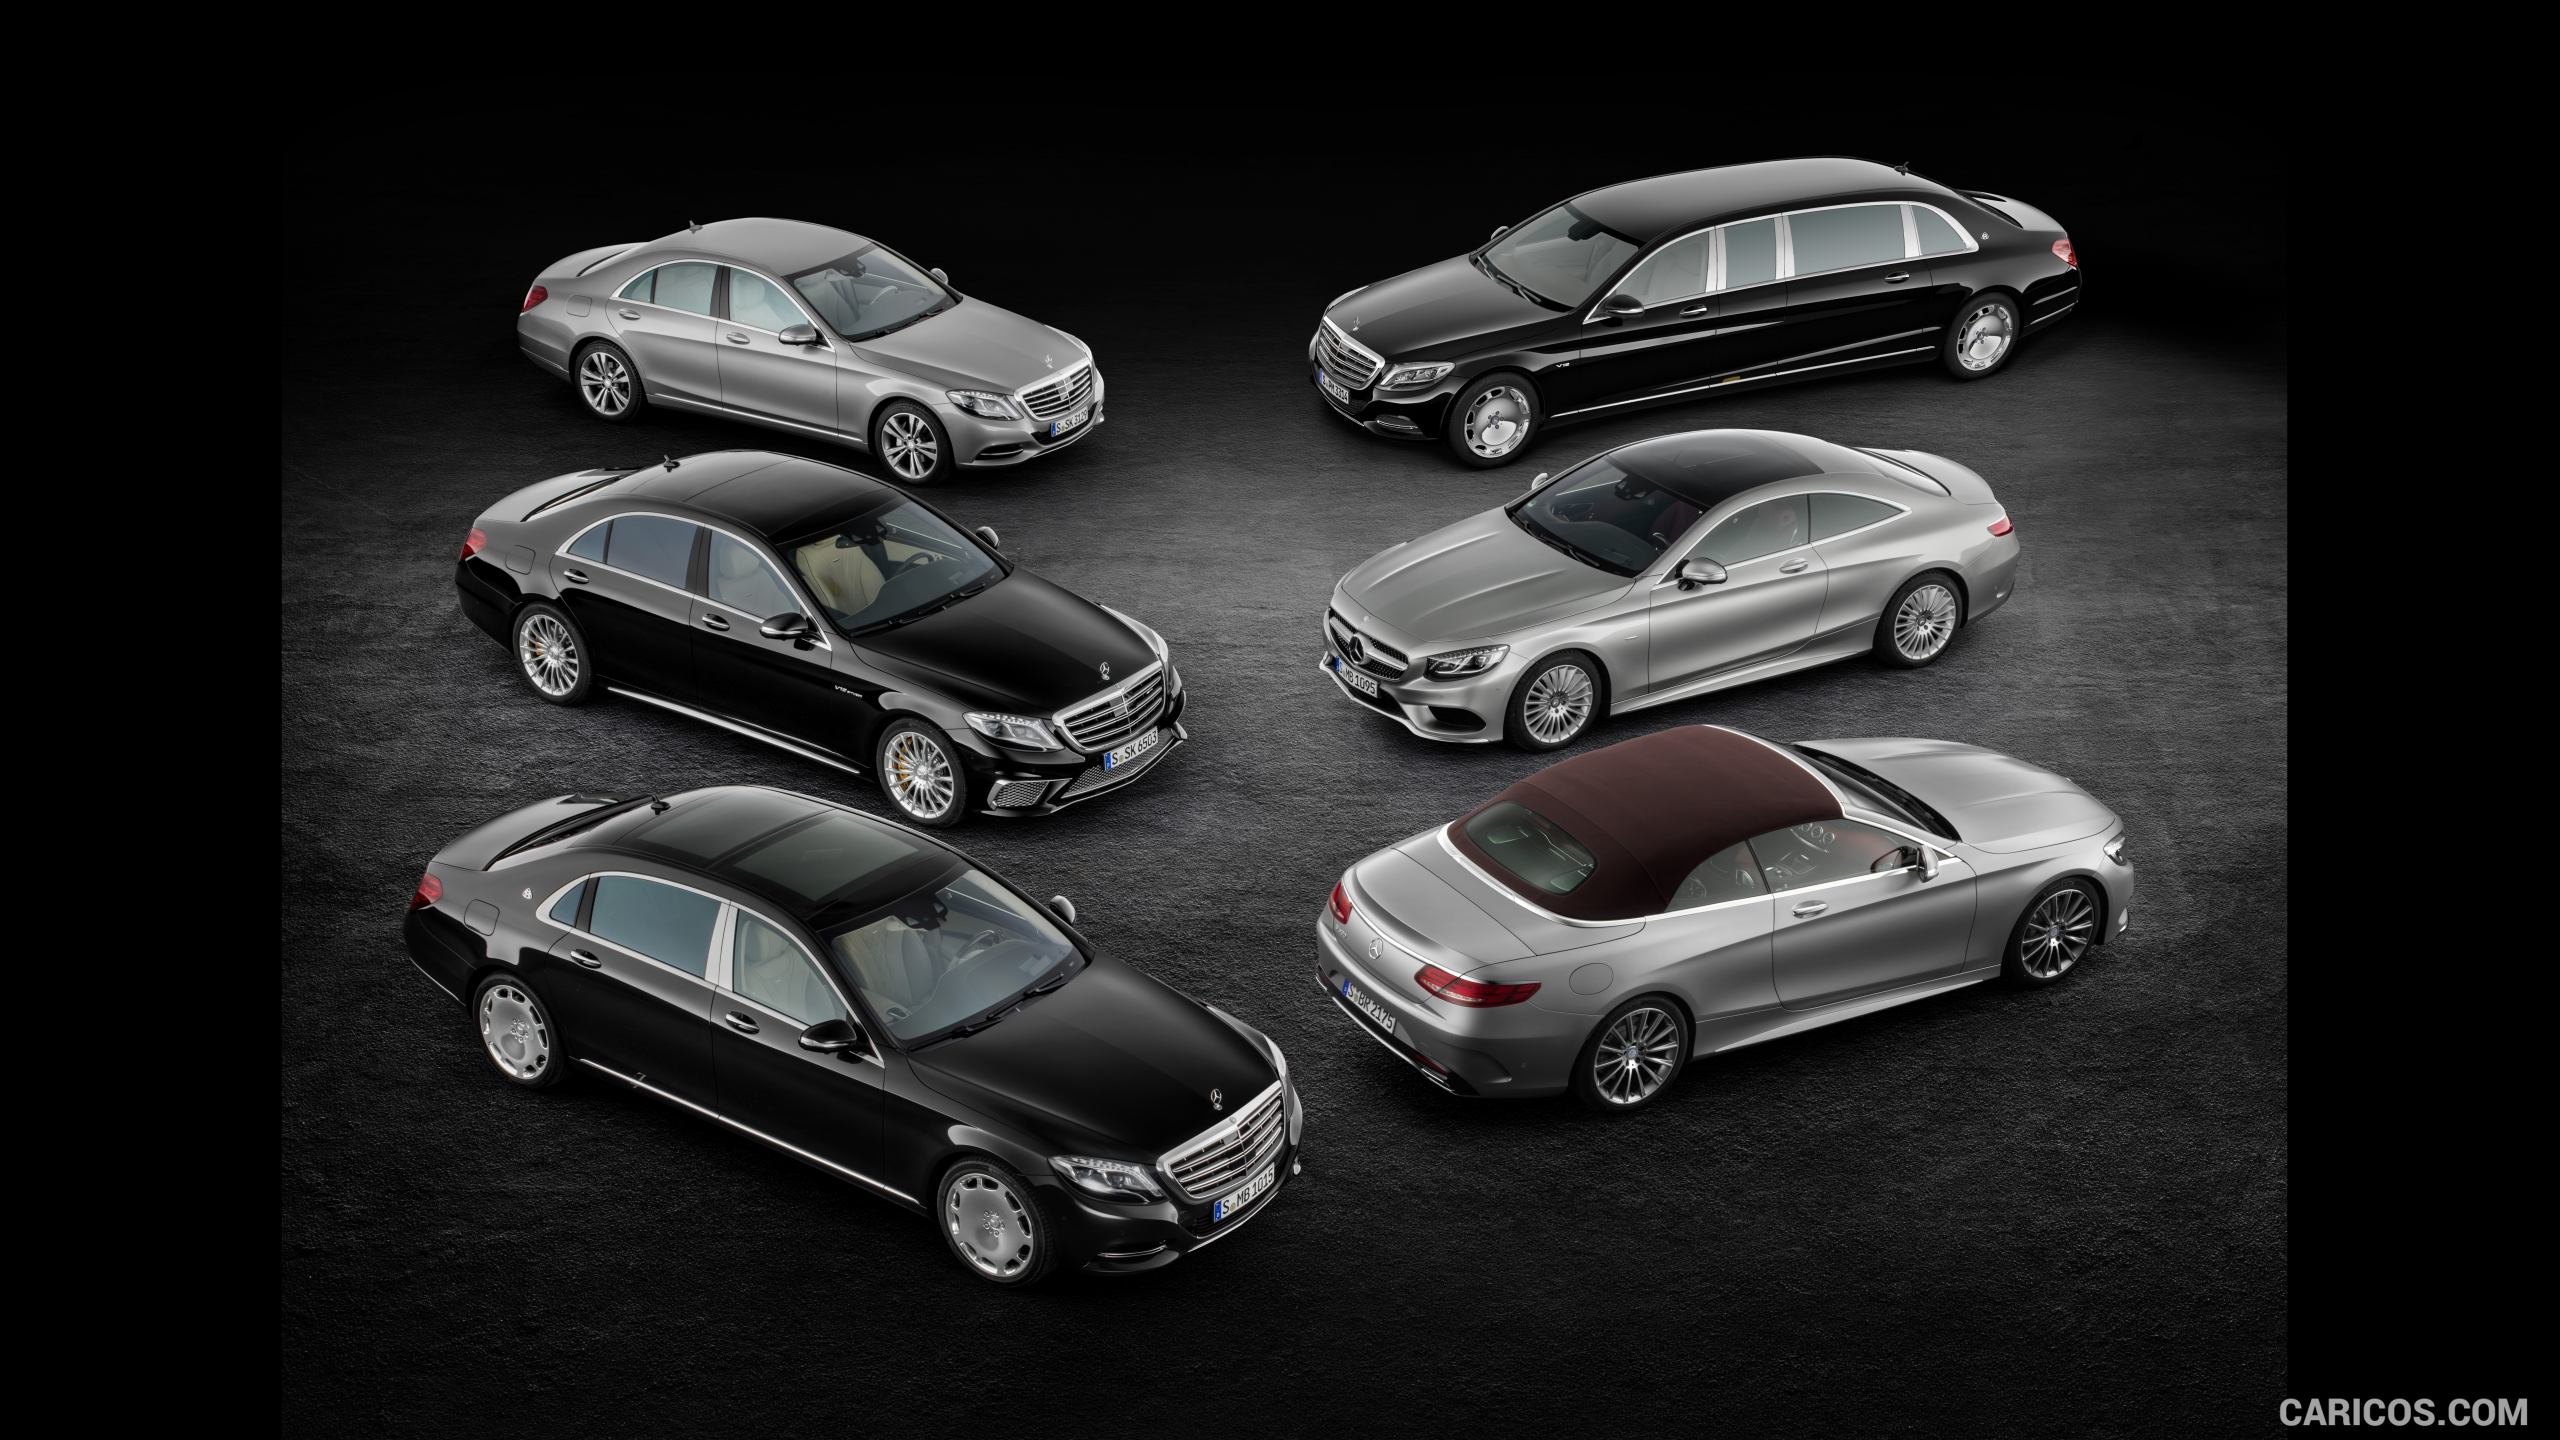 2017 Mercedes-Benz S-Class and S-Class Family, #34 of 56